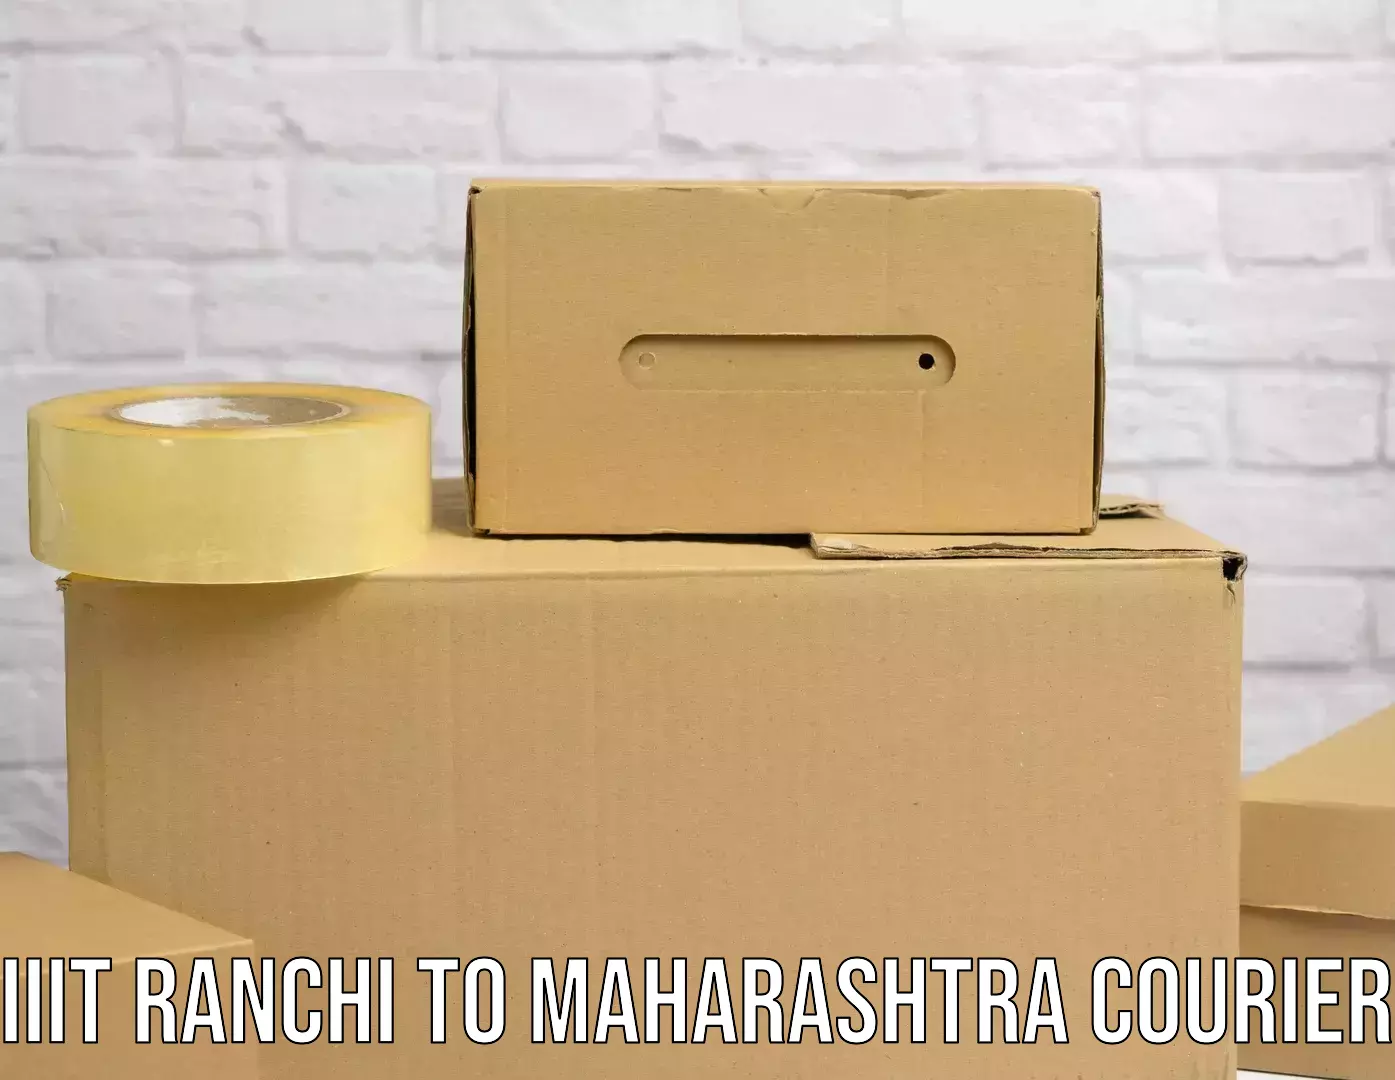 Customer-oriented courier services IIIT Ranchi to Nashik